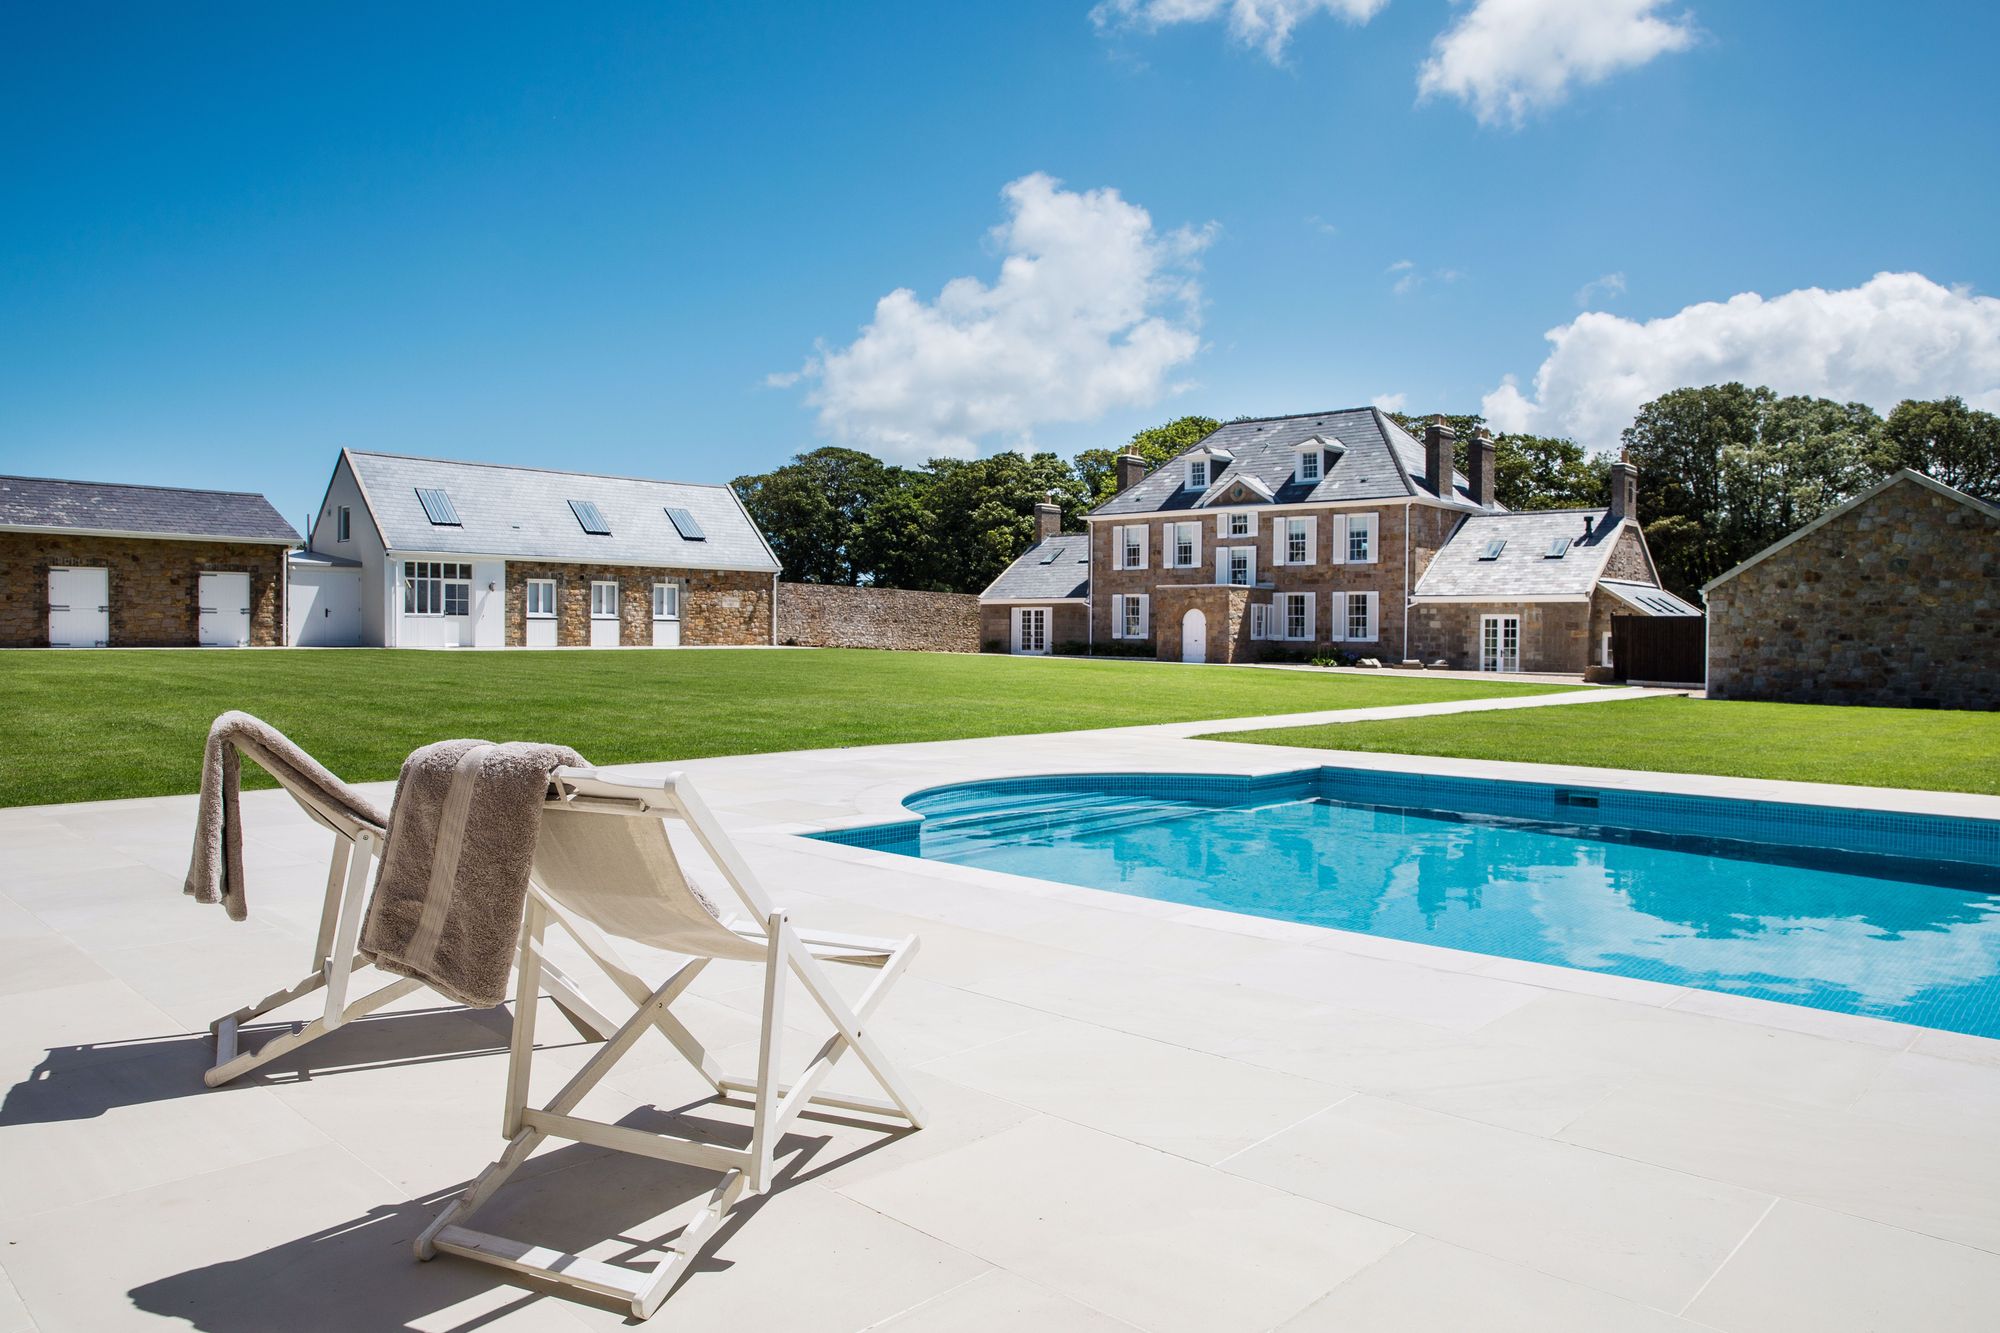 6 bed Property For Sale in St. John, Jersey